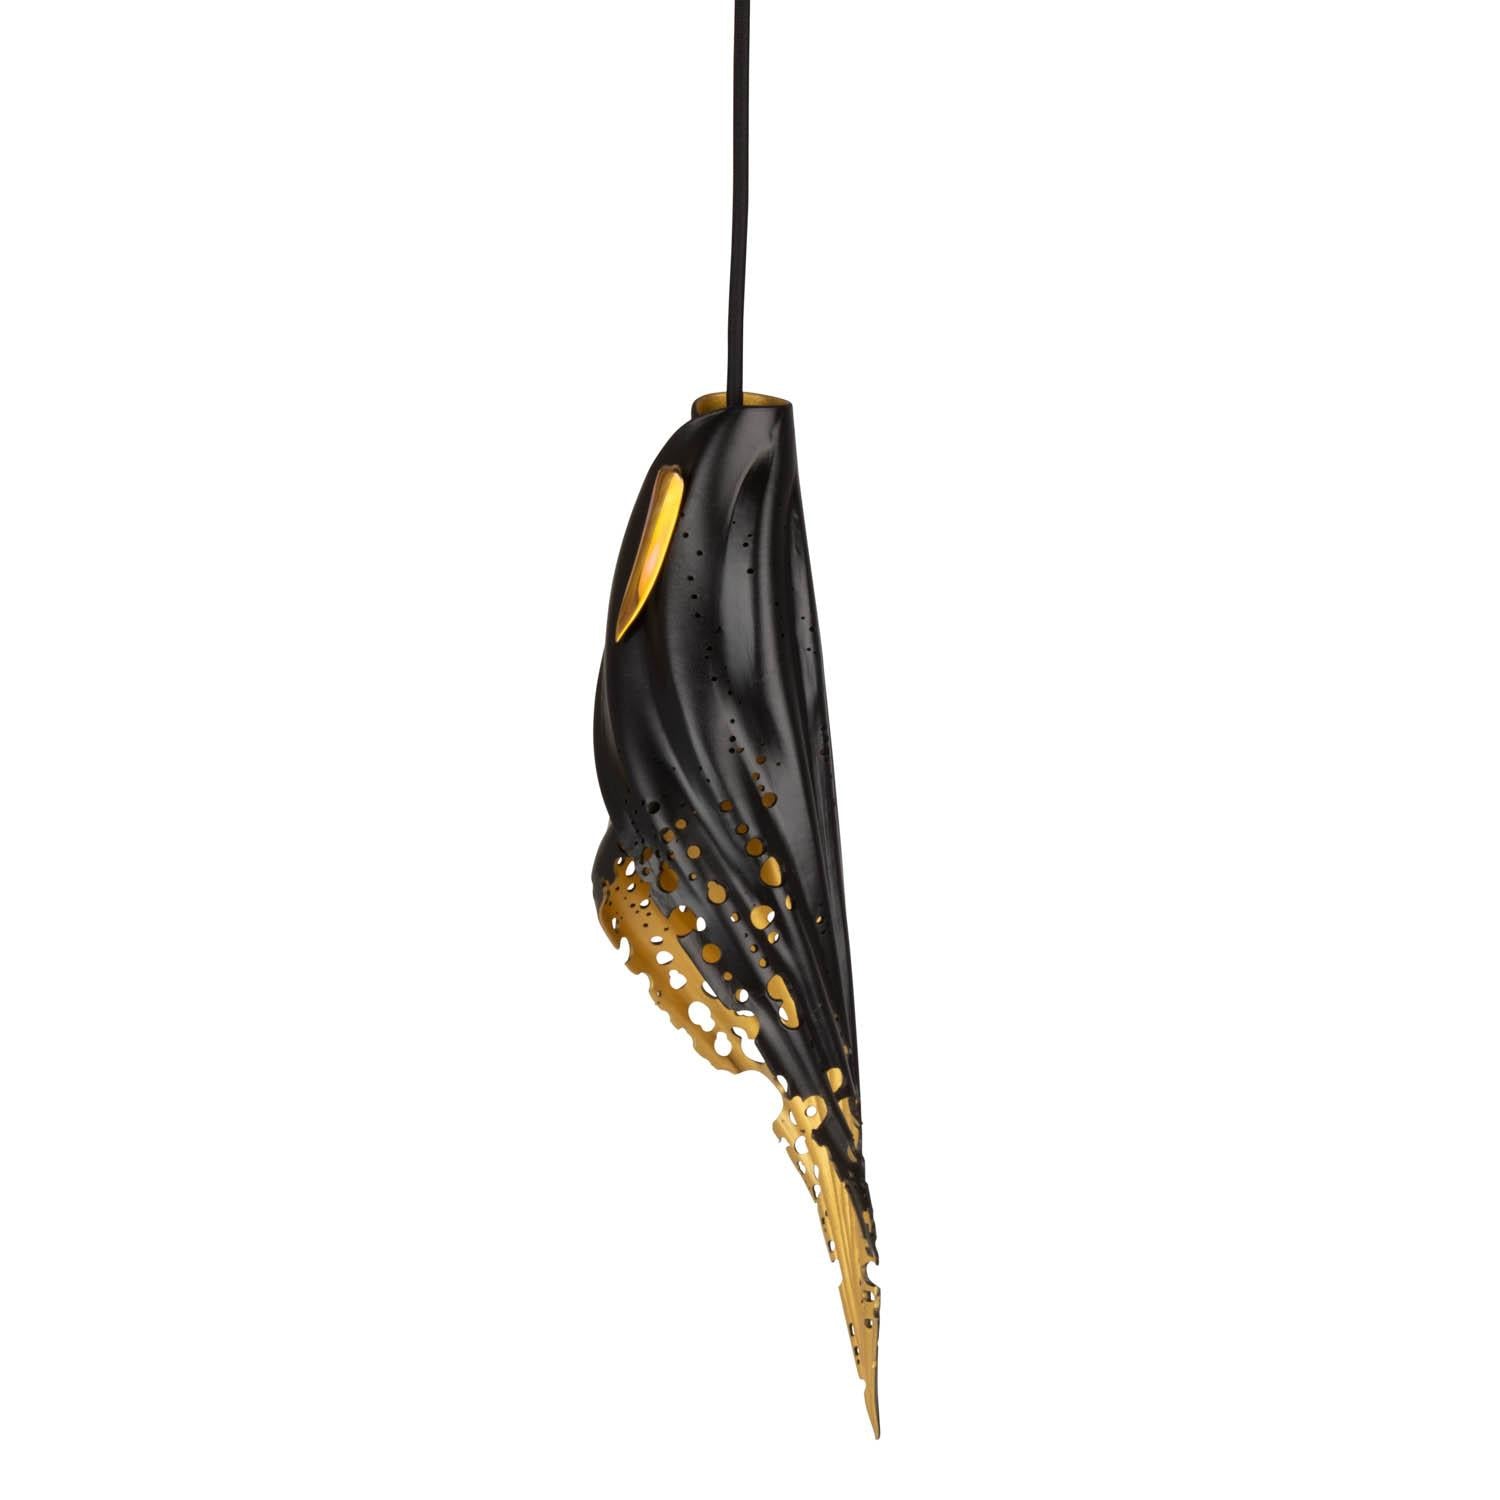 Pierced Blade Light - Small - Black/Gold Leather